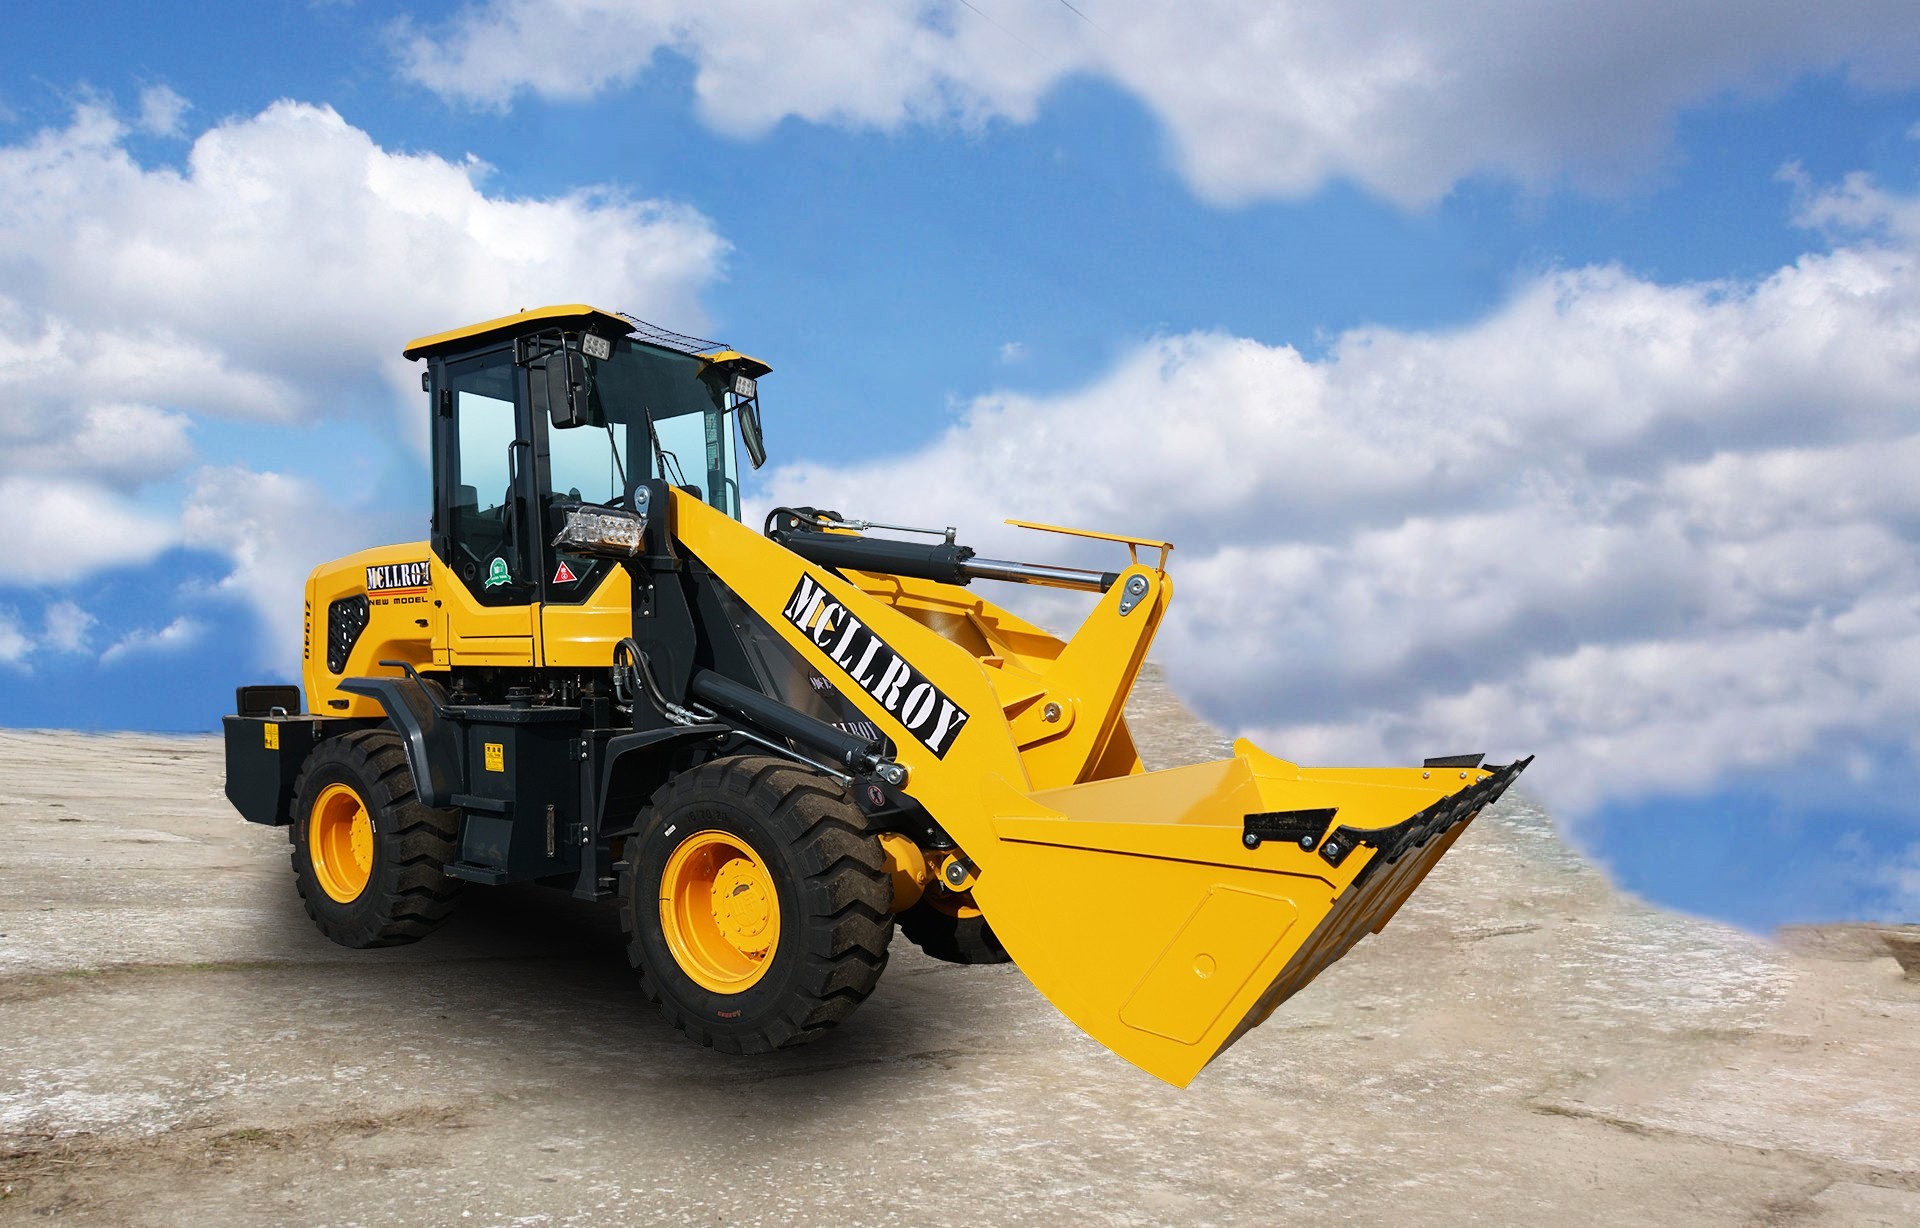 Changfa 4102 Compact Wheel Loaders MSL940/ZL940  In Construction